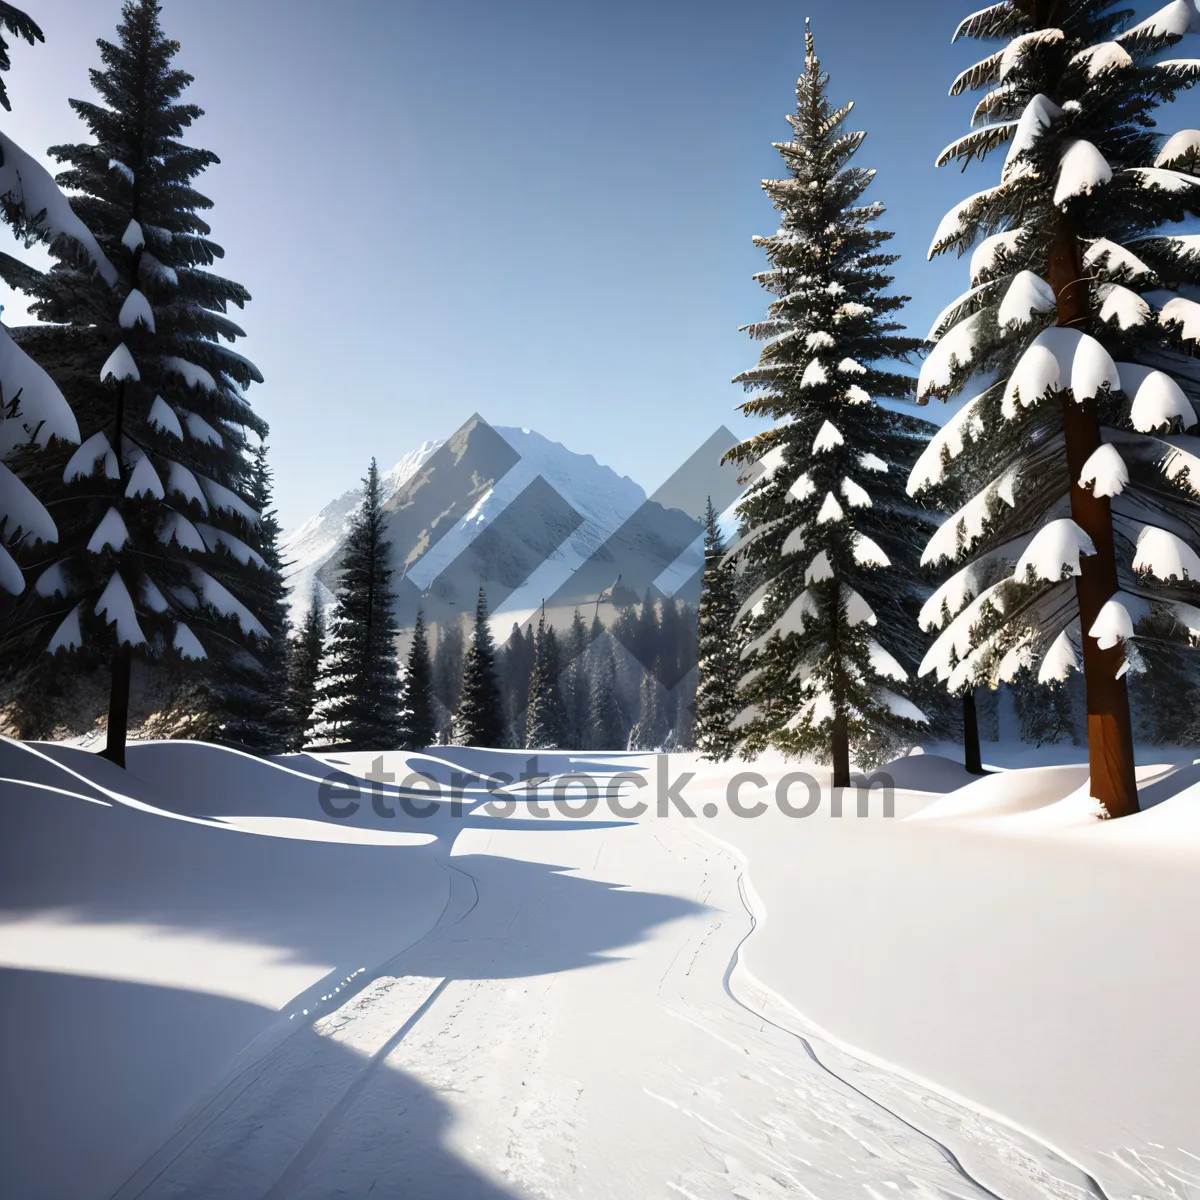 Picture of Frosty Pine Trees, Snowy Mountain Landscape